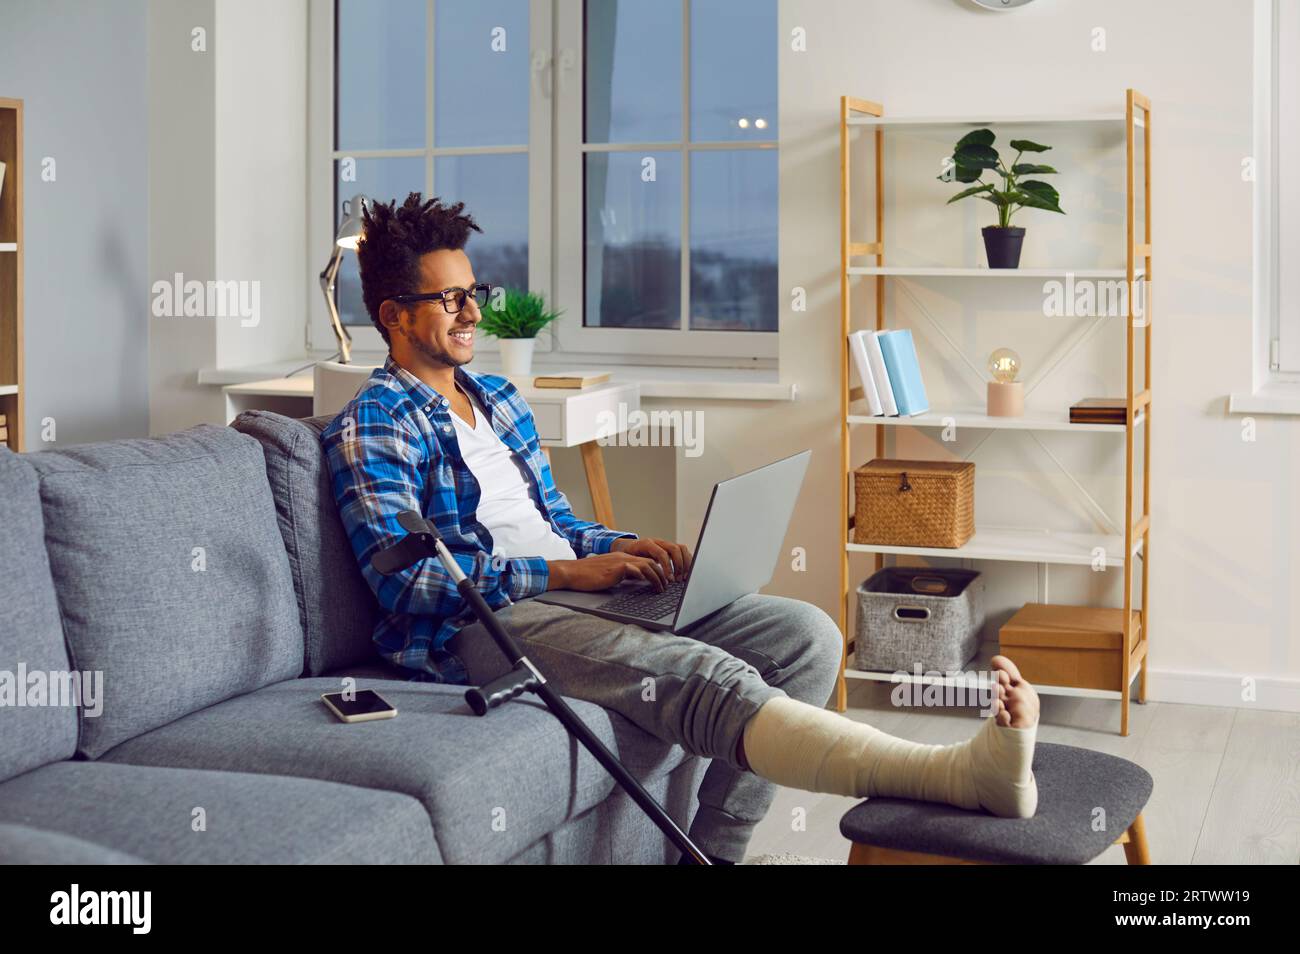 Young man with broken leg in plaster cast sitting on couch with laptop Stock Photo